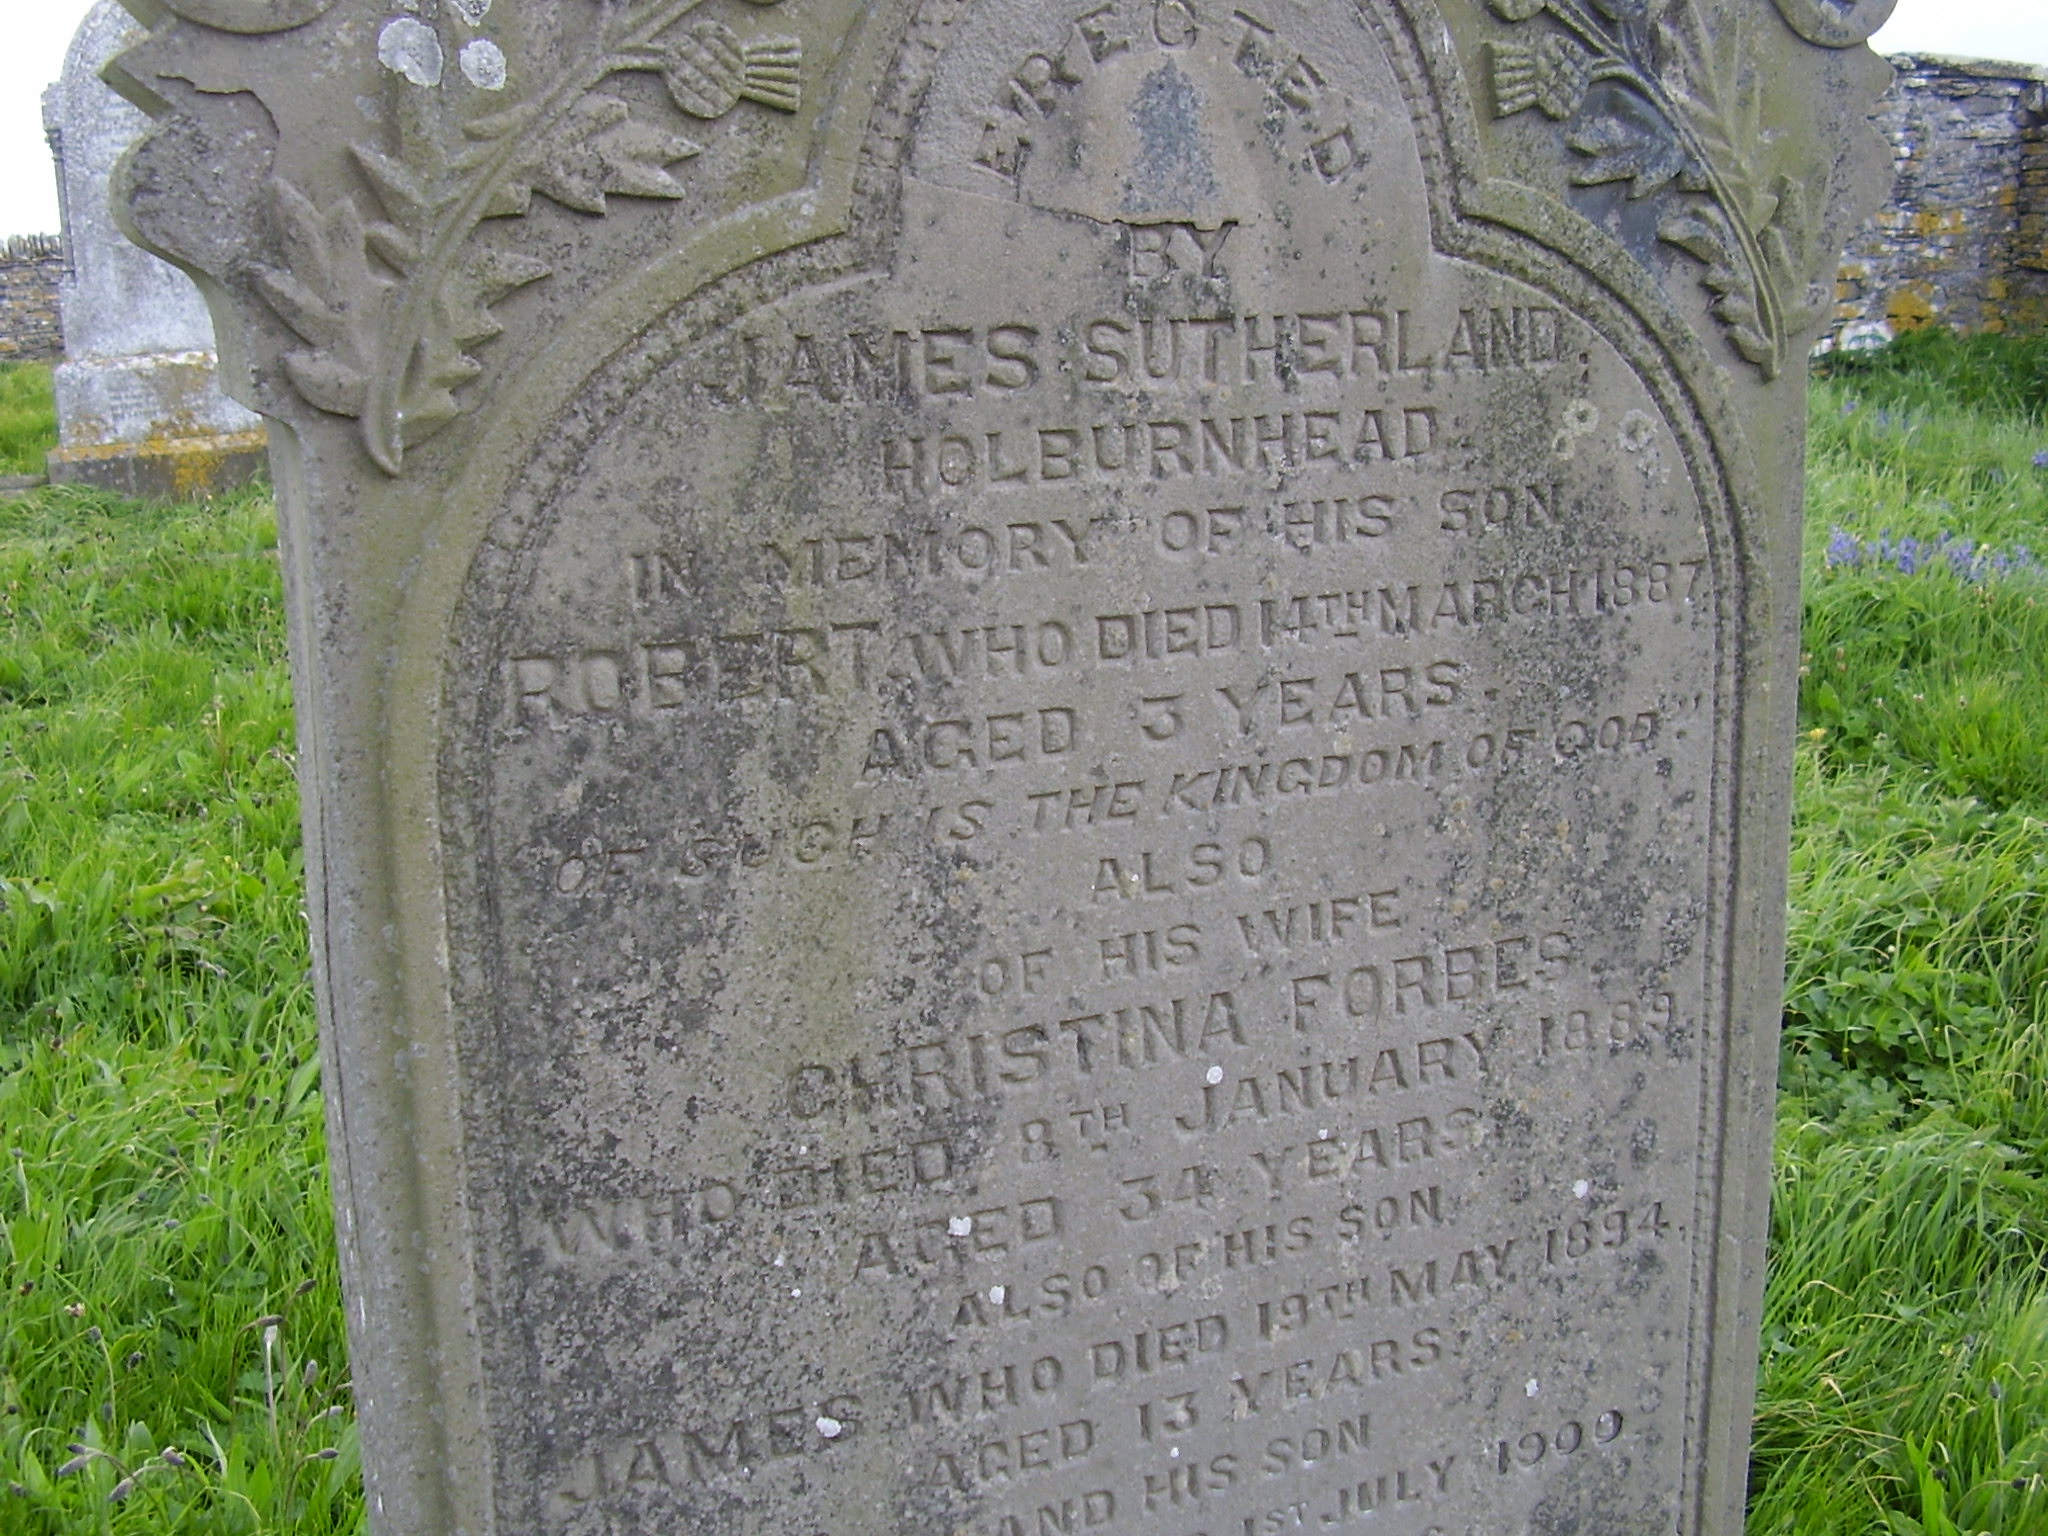 Erected by James Sutherland